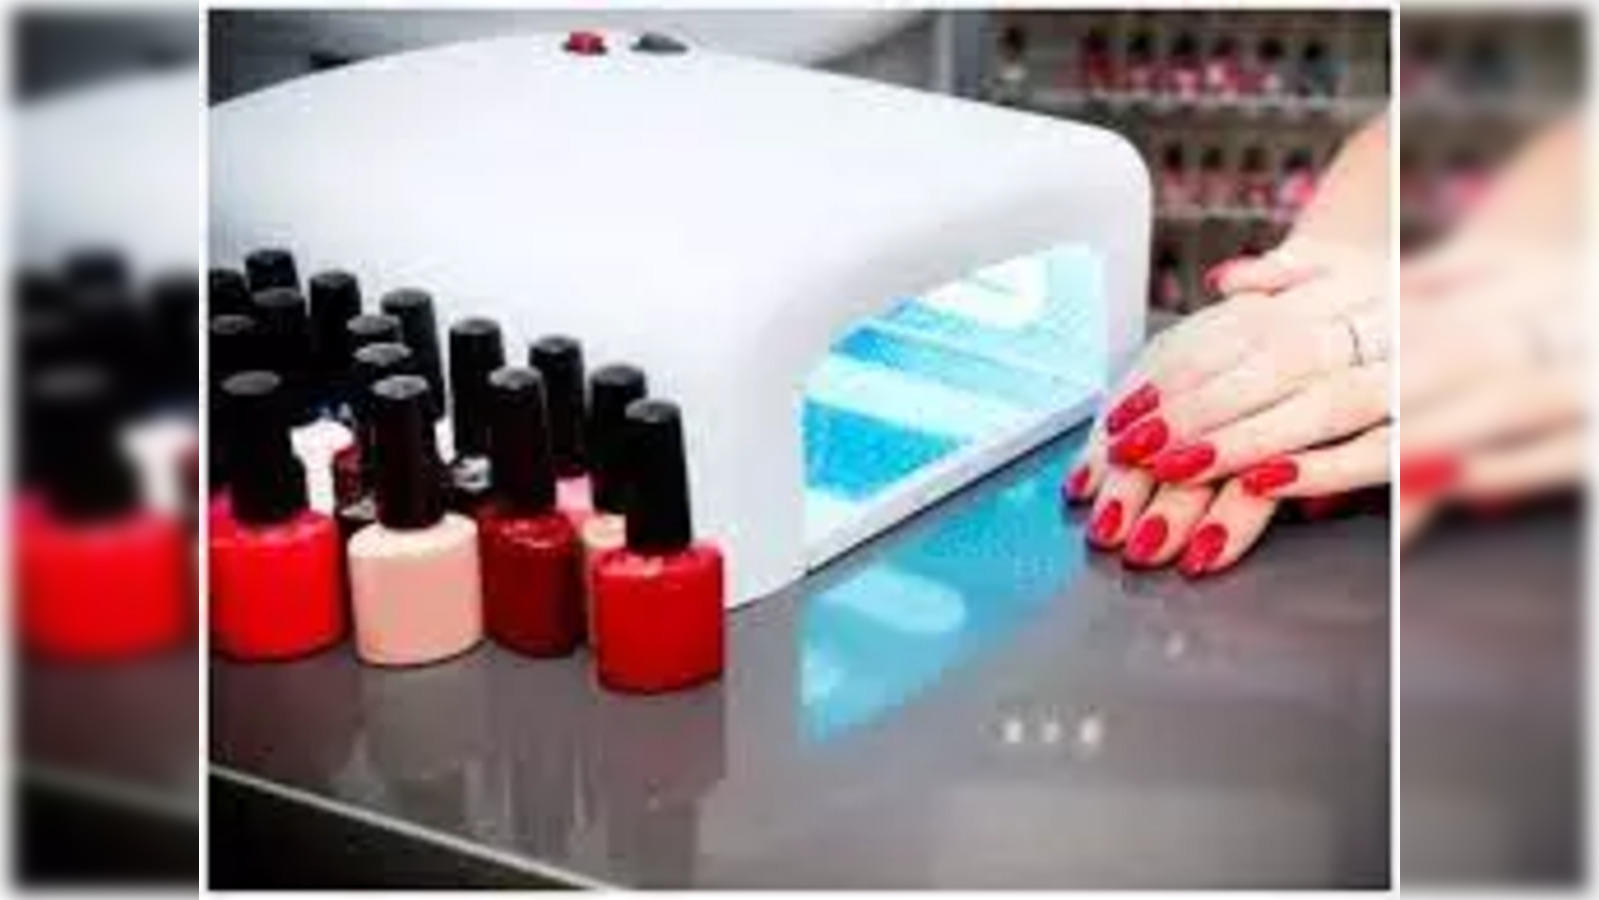 A new study found that UV nail dryers can cause cell damage and mutati